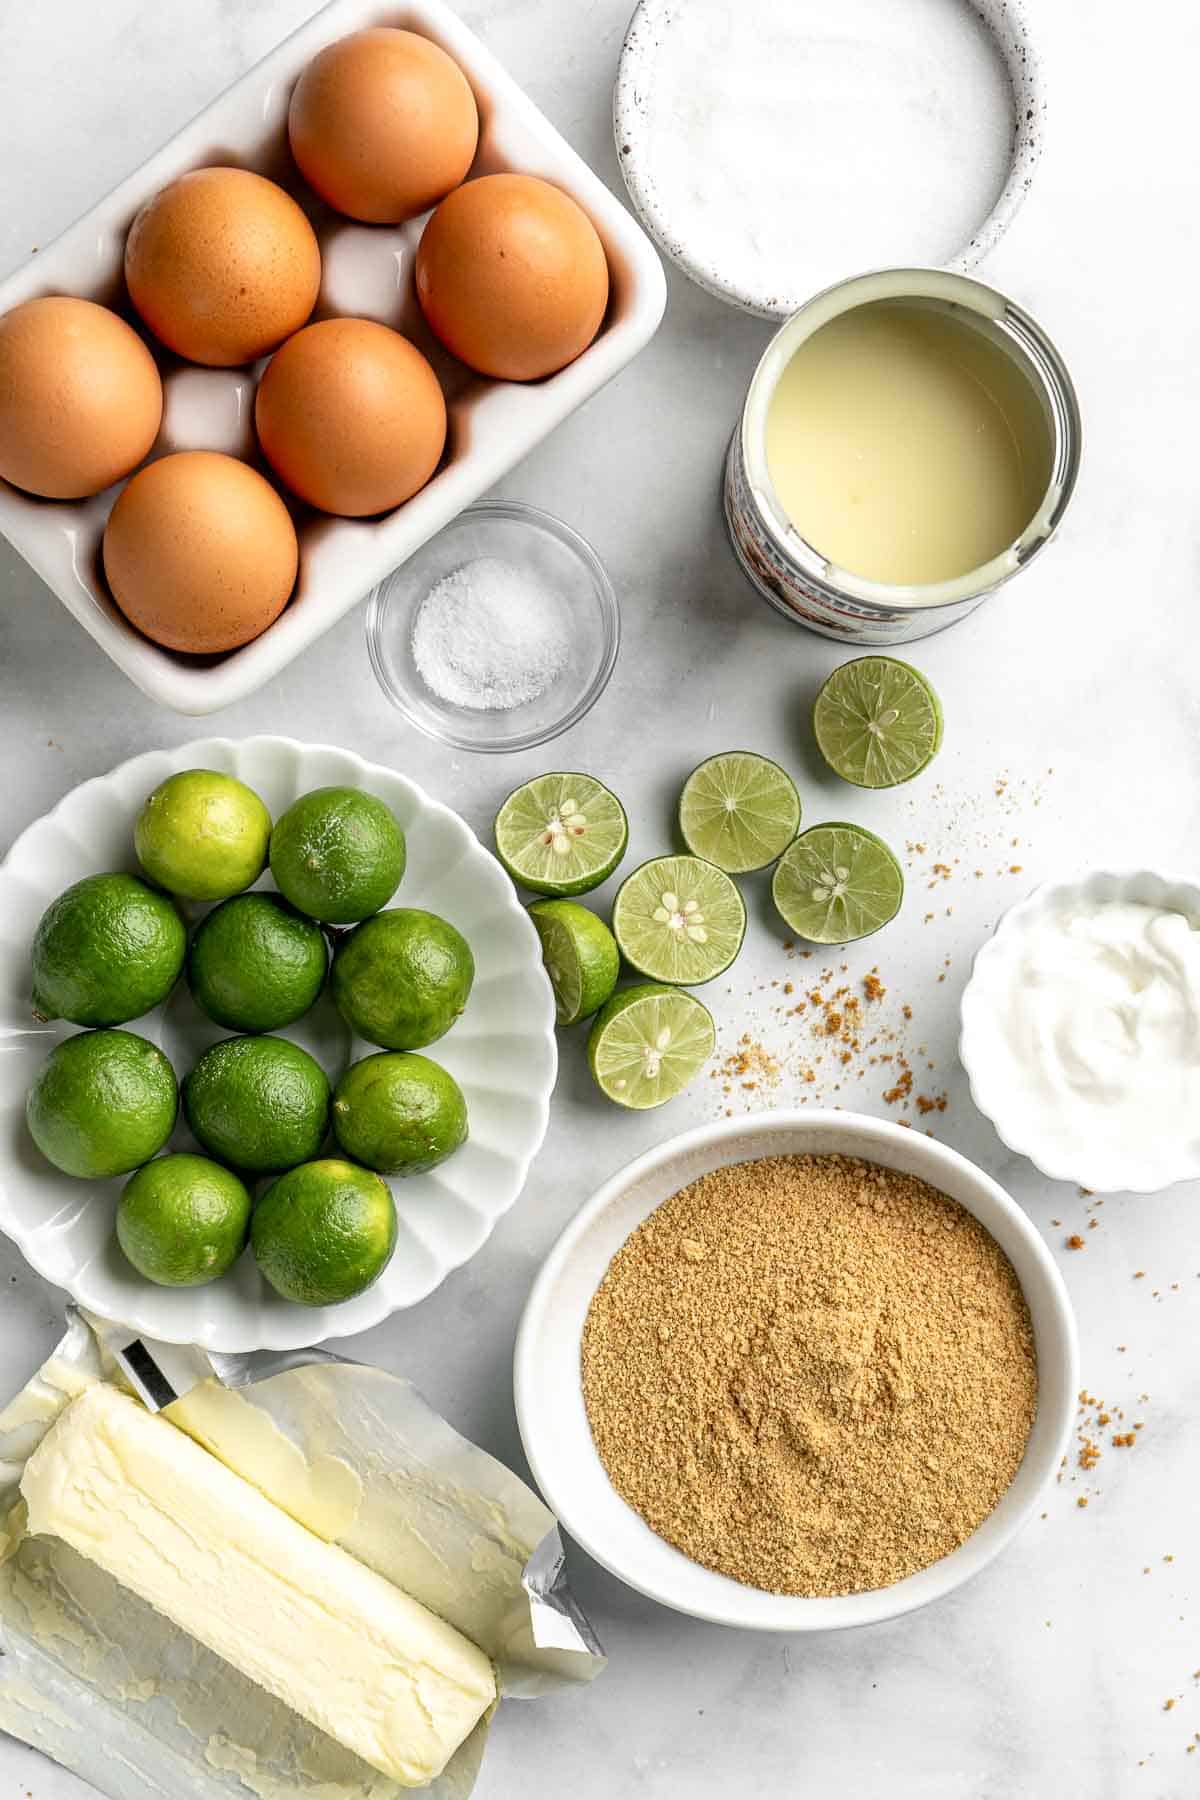 Perfectly creamy and tart with a buttery graham cracker crust, this easy Key Lime Pie is a classic for a reason. You won't need another pie recipe again! | aheadofthyme.com